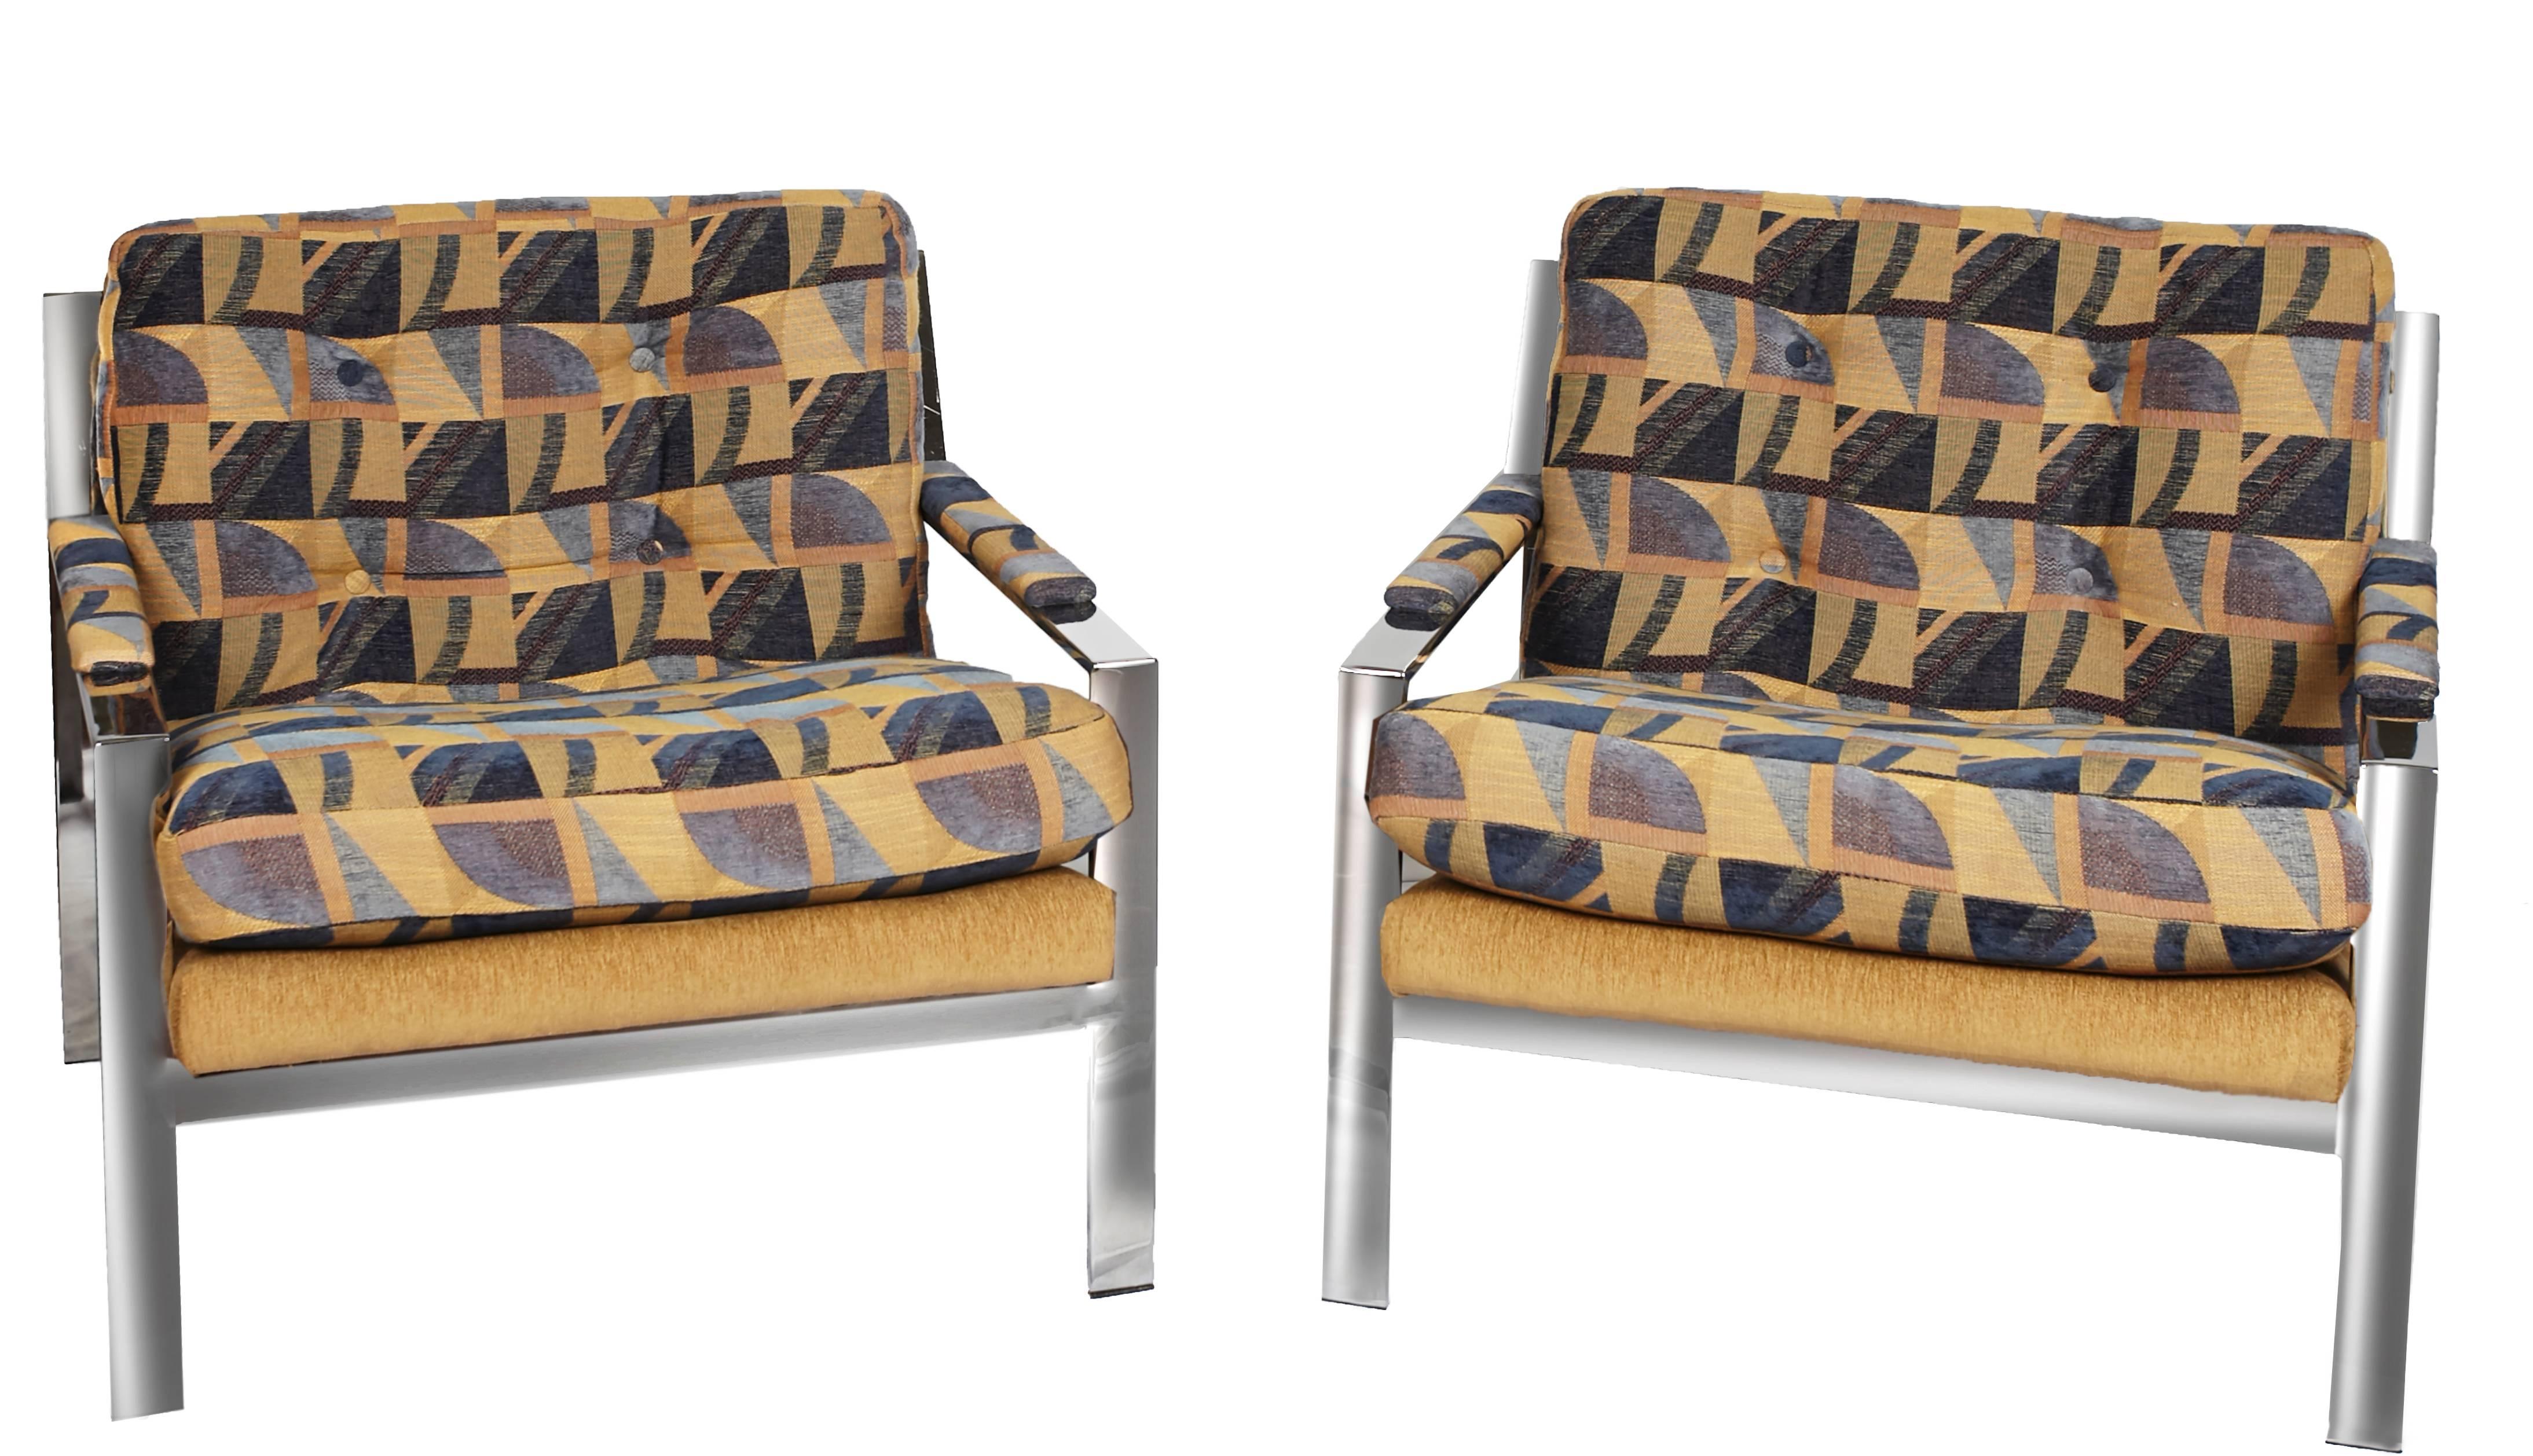 Pair of Cy Mann lounge chairs from the 1970s, with polished chrome and original fabric. It is model #232, a flat-bar design in polished chrome.
A blue tan and black fabric with geometric design. The back and seat cushions are semi-attached and arms